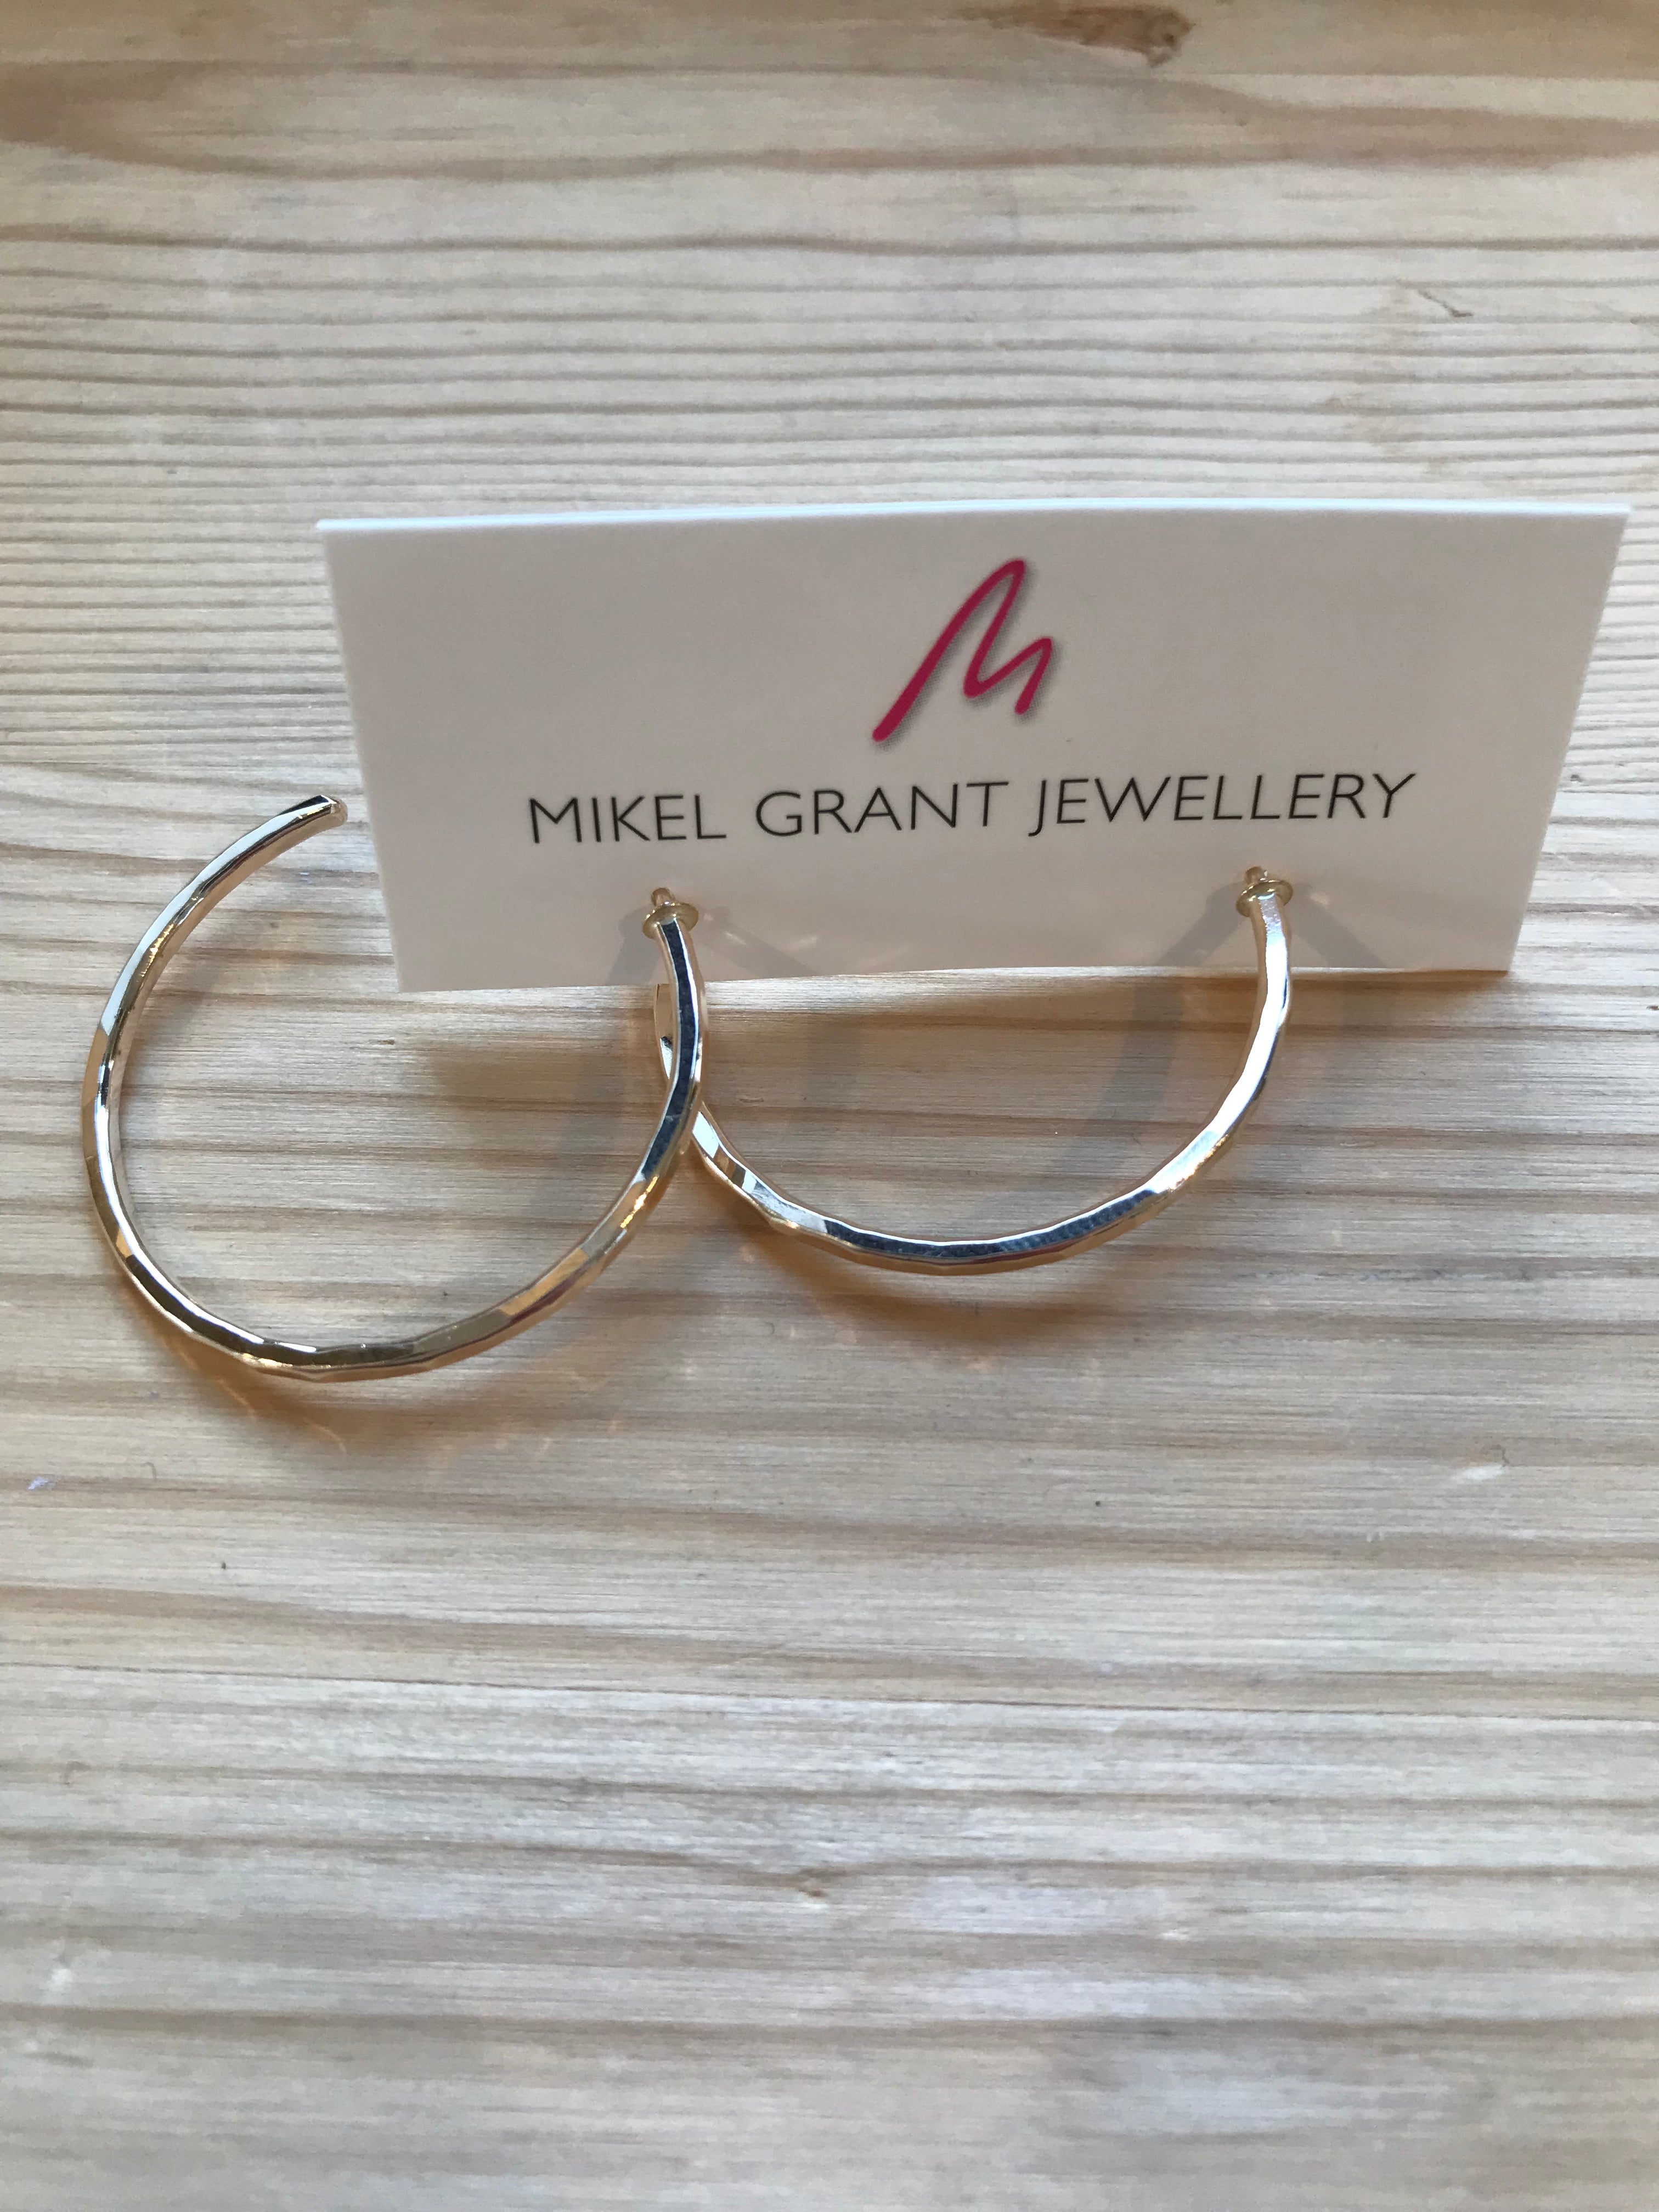 Open Hoop Studs - 14k gold-fill hammered small by Mikel Grant, made in Sechelt BCOpen Hoop Studs - 14k gold-fill hammered small by Mikel Grant, made in Sechelt BC